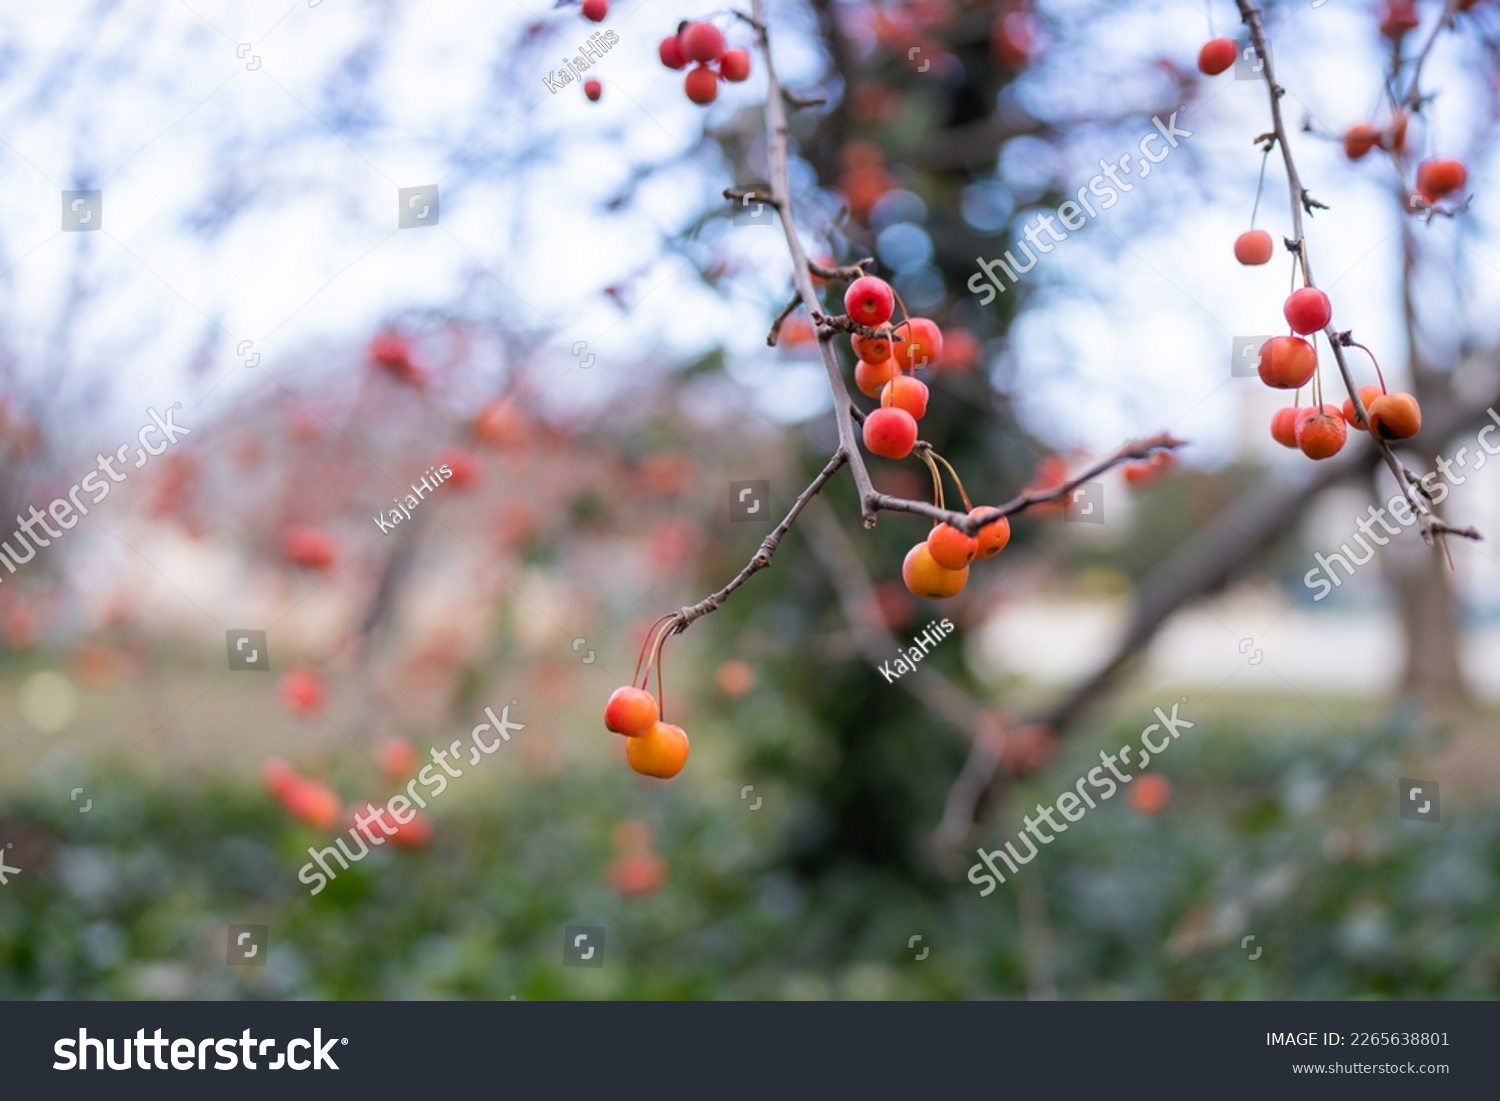 Plumleaf crab apple (Malus Prunifolia) branch with fruits in winter #2265638801